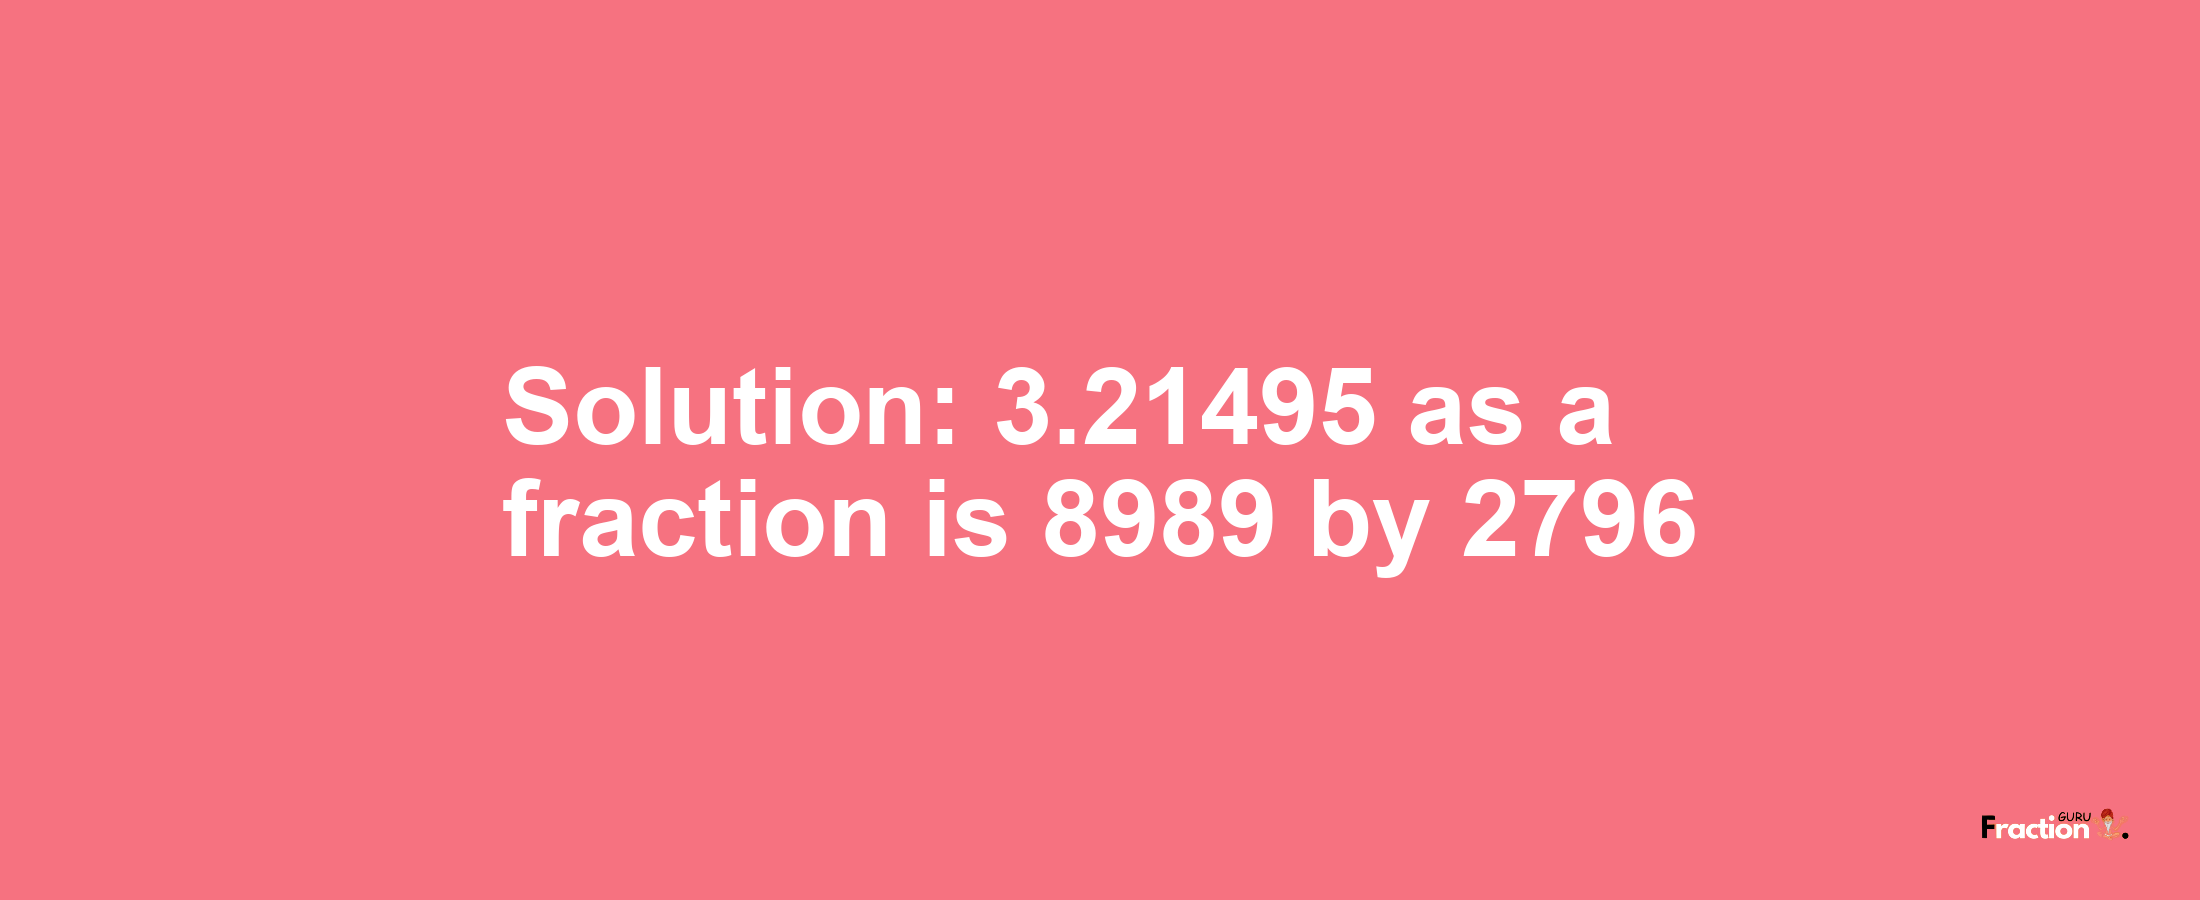 Solution:3.21495 as a fraction is 8989/2796